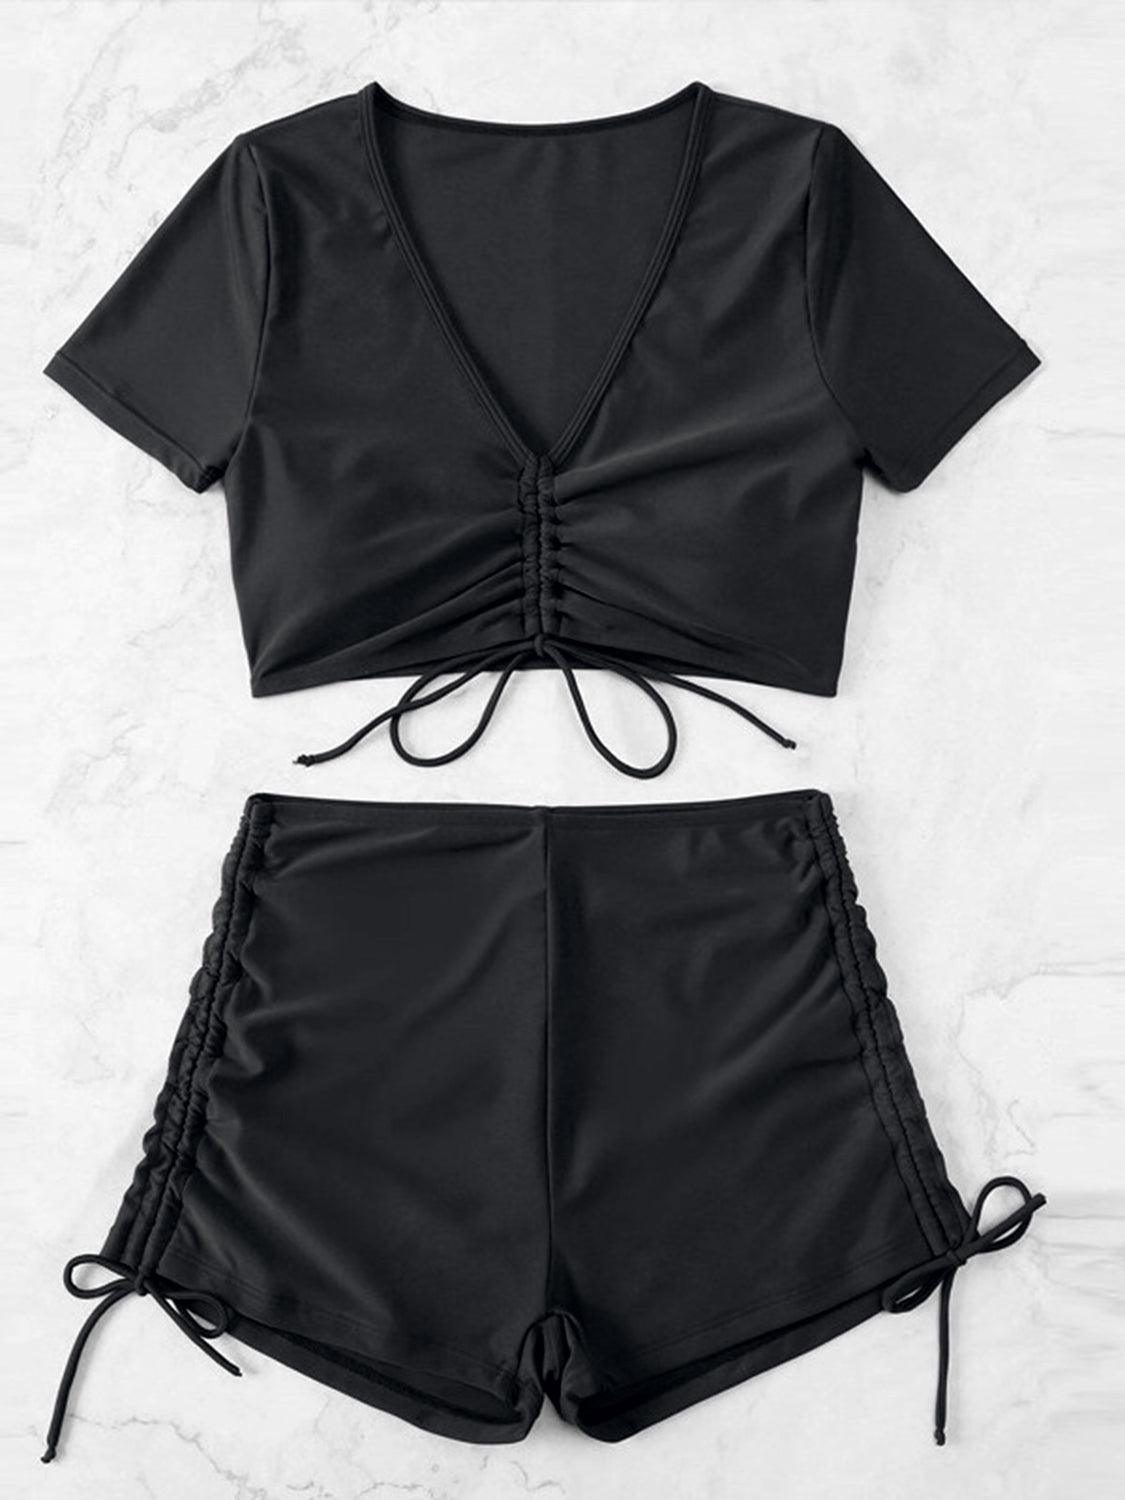 a women's black top and shorts set